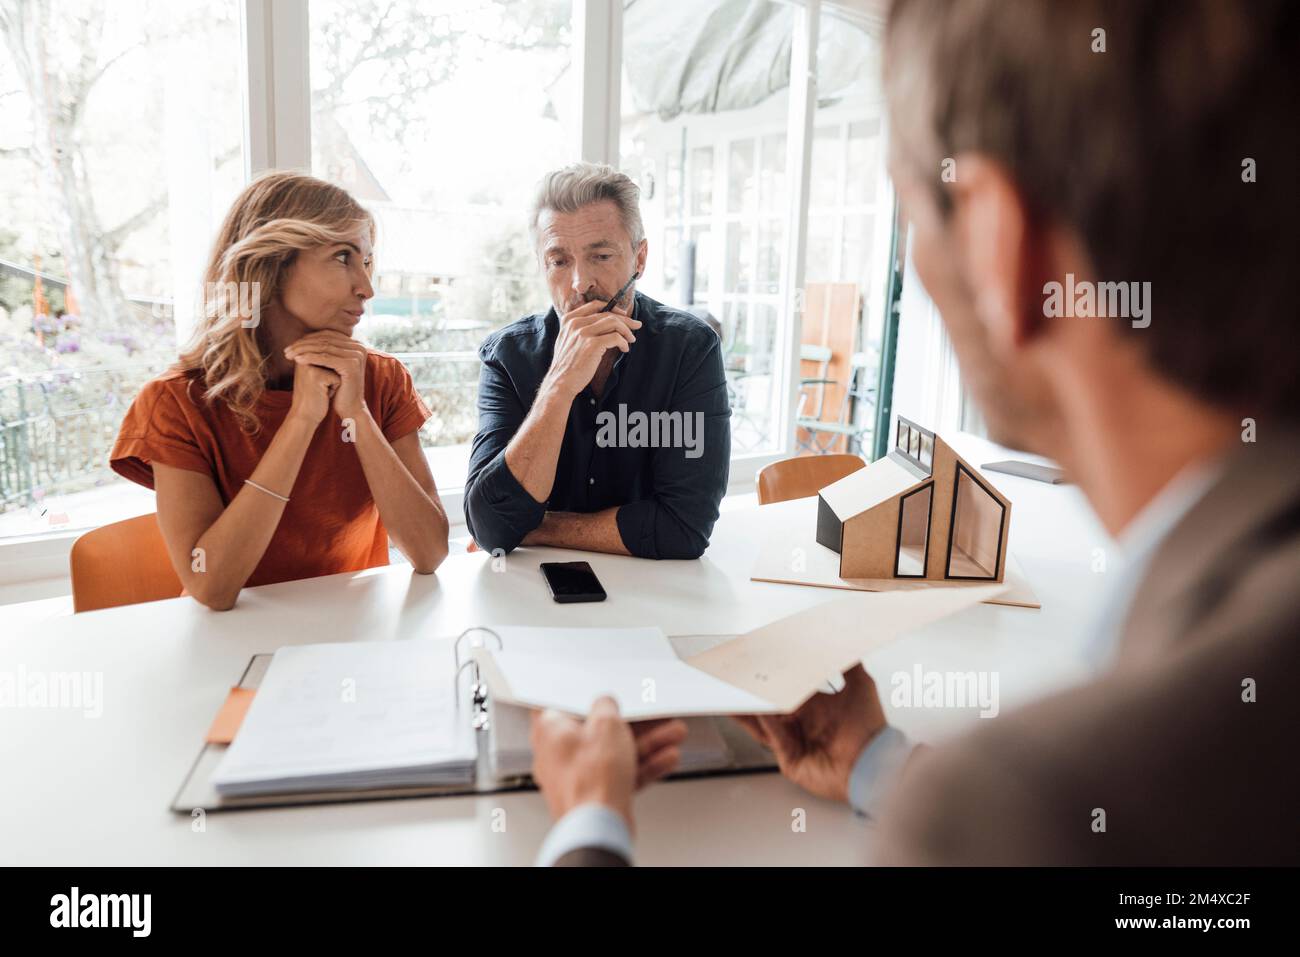 Mature couple discussing over documents with real estate agent at table Stock Photo